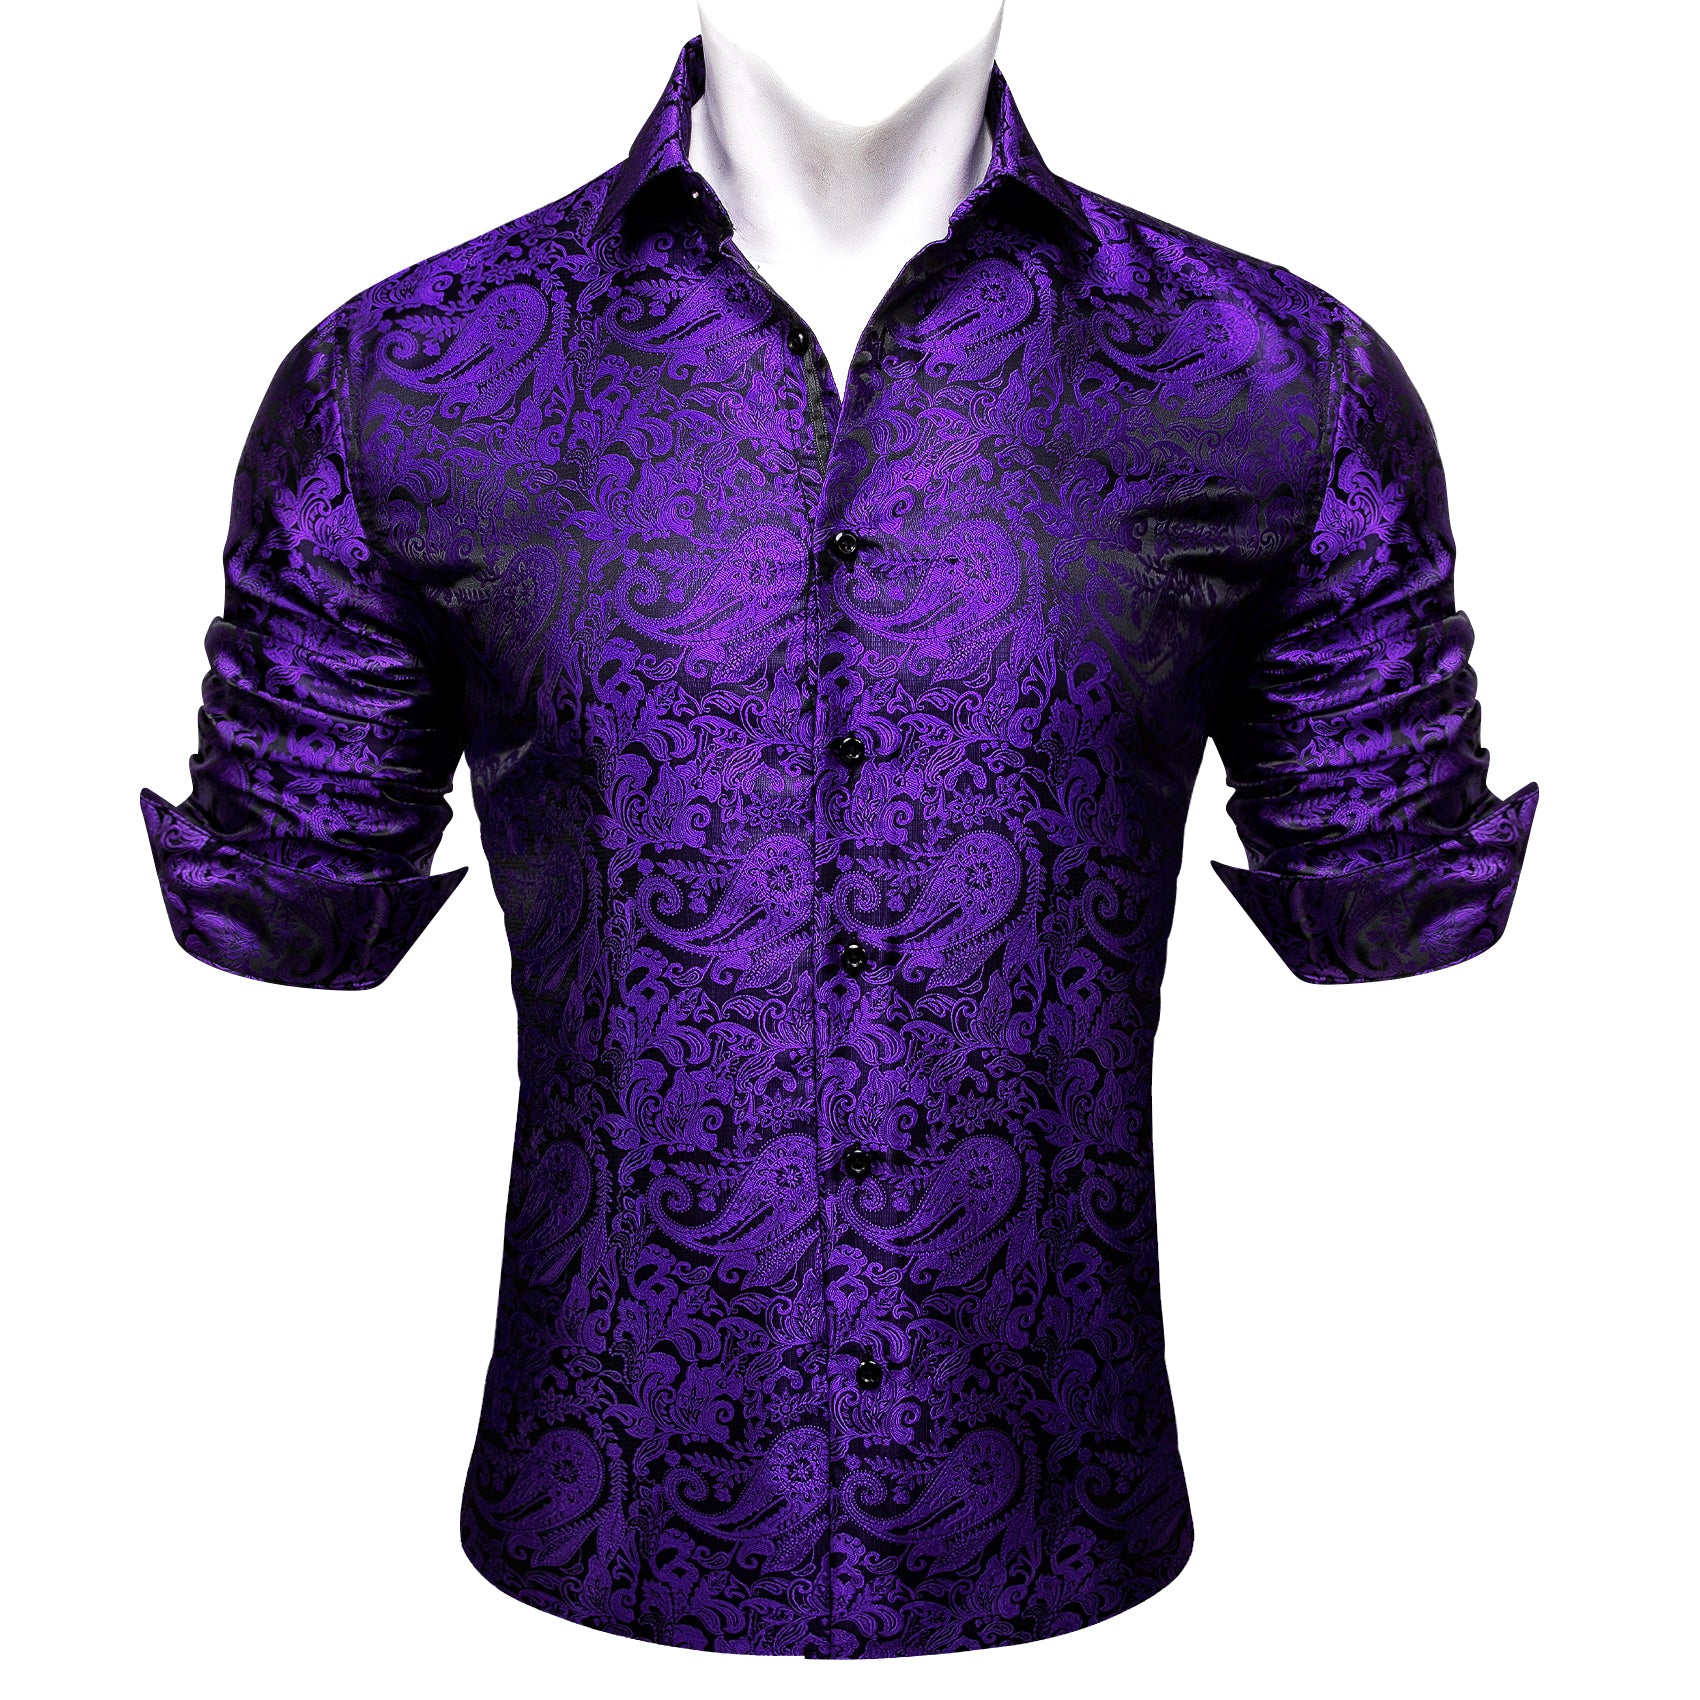 fitted men's dress shirts